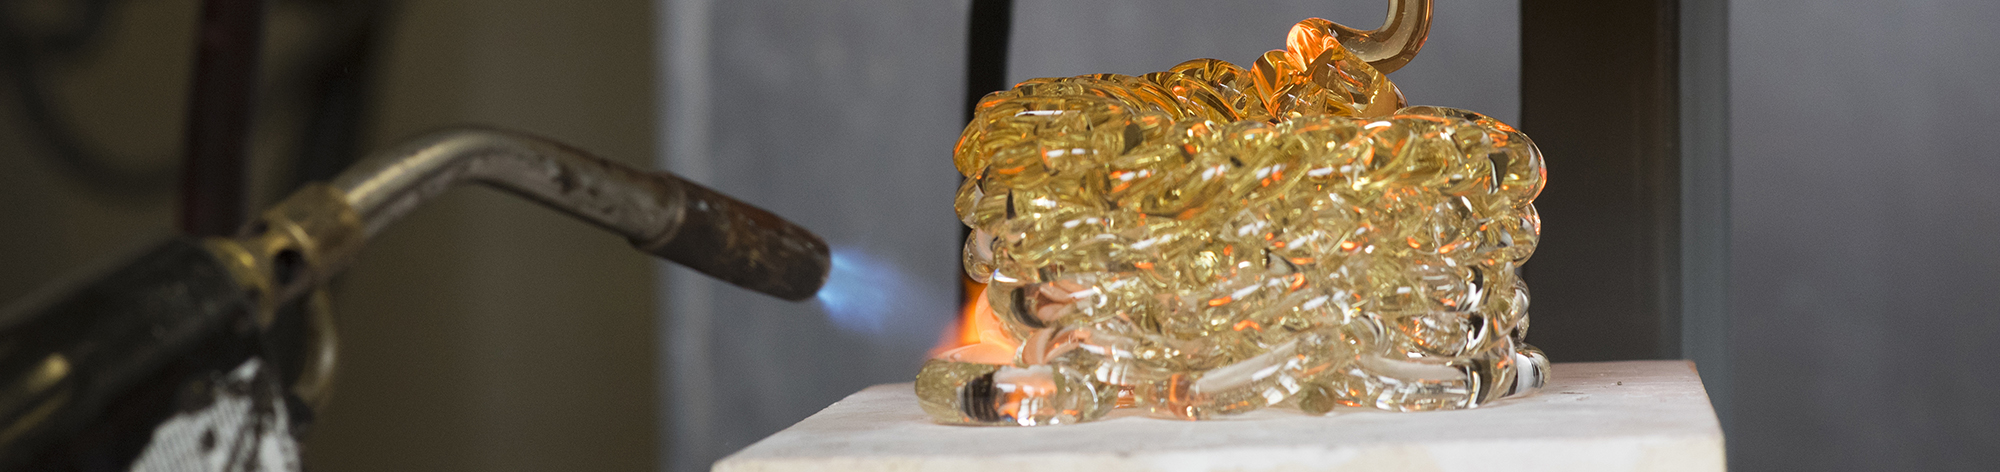 A molten glass 3D printer creates a coiled products